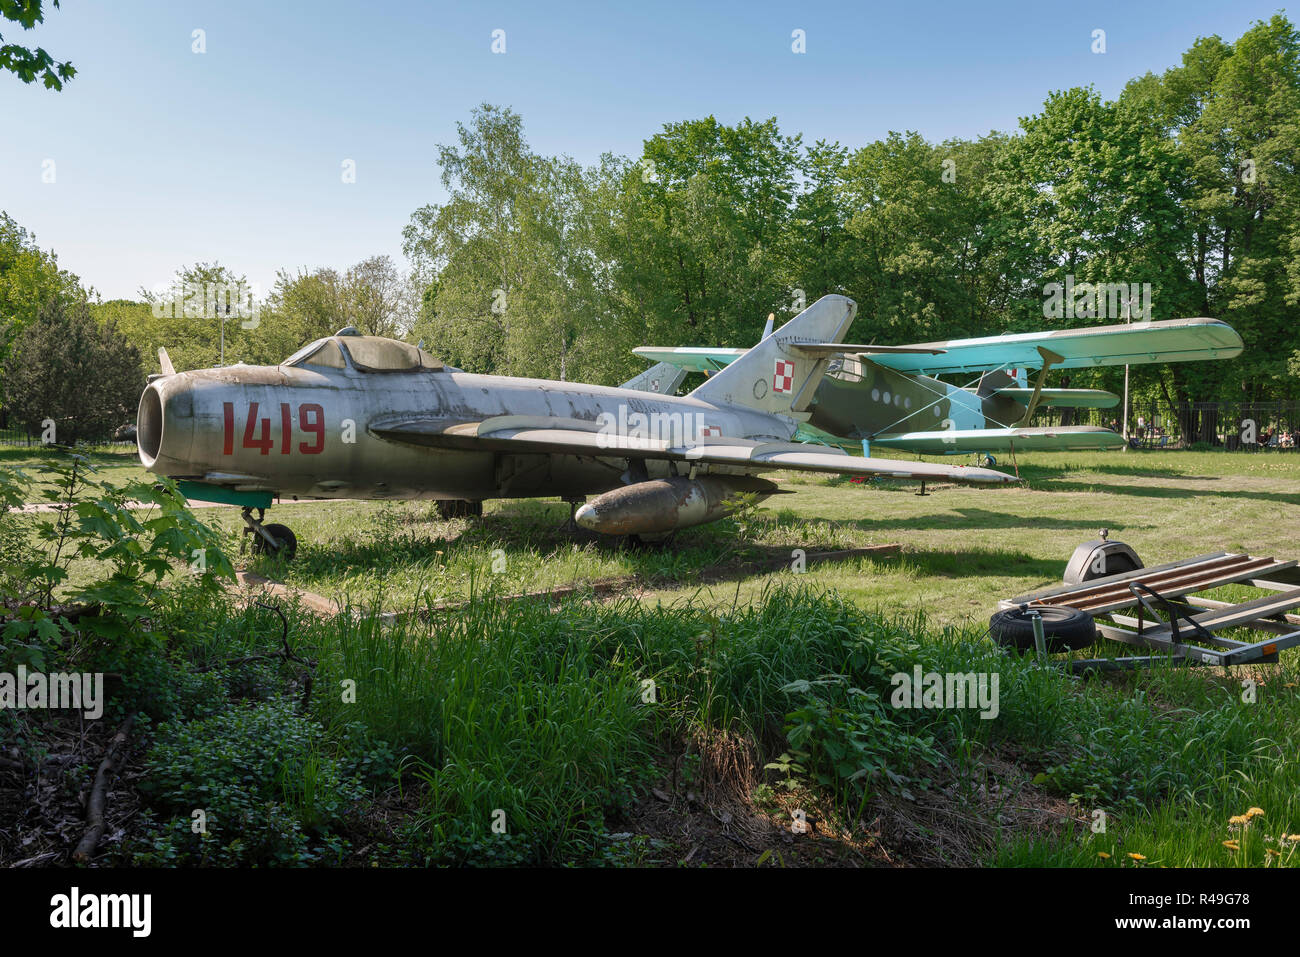 1960s soviet russian jet fighter, view of a Warsaw Pact era jet fighter aircraft displayed in a field in the Poznan Museum of Armaments, Poland. Stock Photo